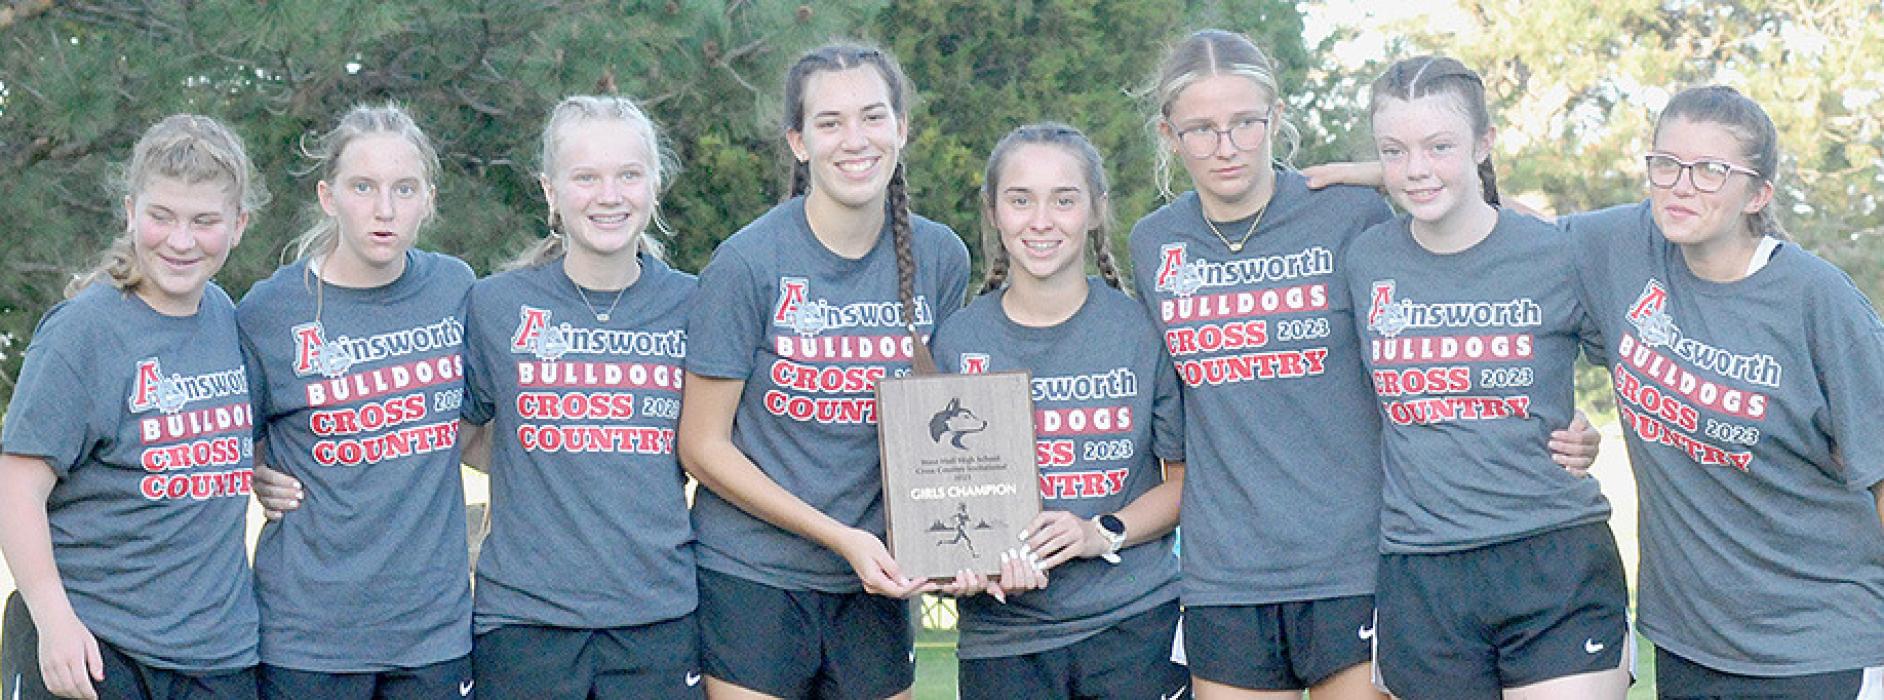 The Ainsworth Girls Cross Country Team ran to first place at the West Holt Cross Country Invitational. Team members are (Left to Right): Cassandra Cole, Preselyn Goochey, Kiley Orton, Katherine Kerrigan, Tessa Barthel, Emma Kennedy, Payton Moody and Jodie Denny.